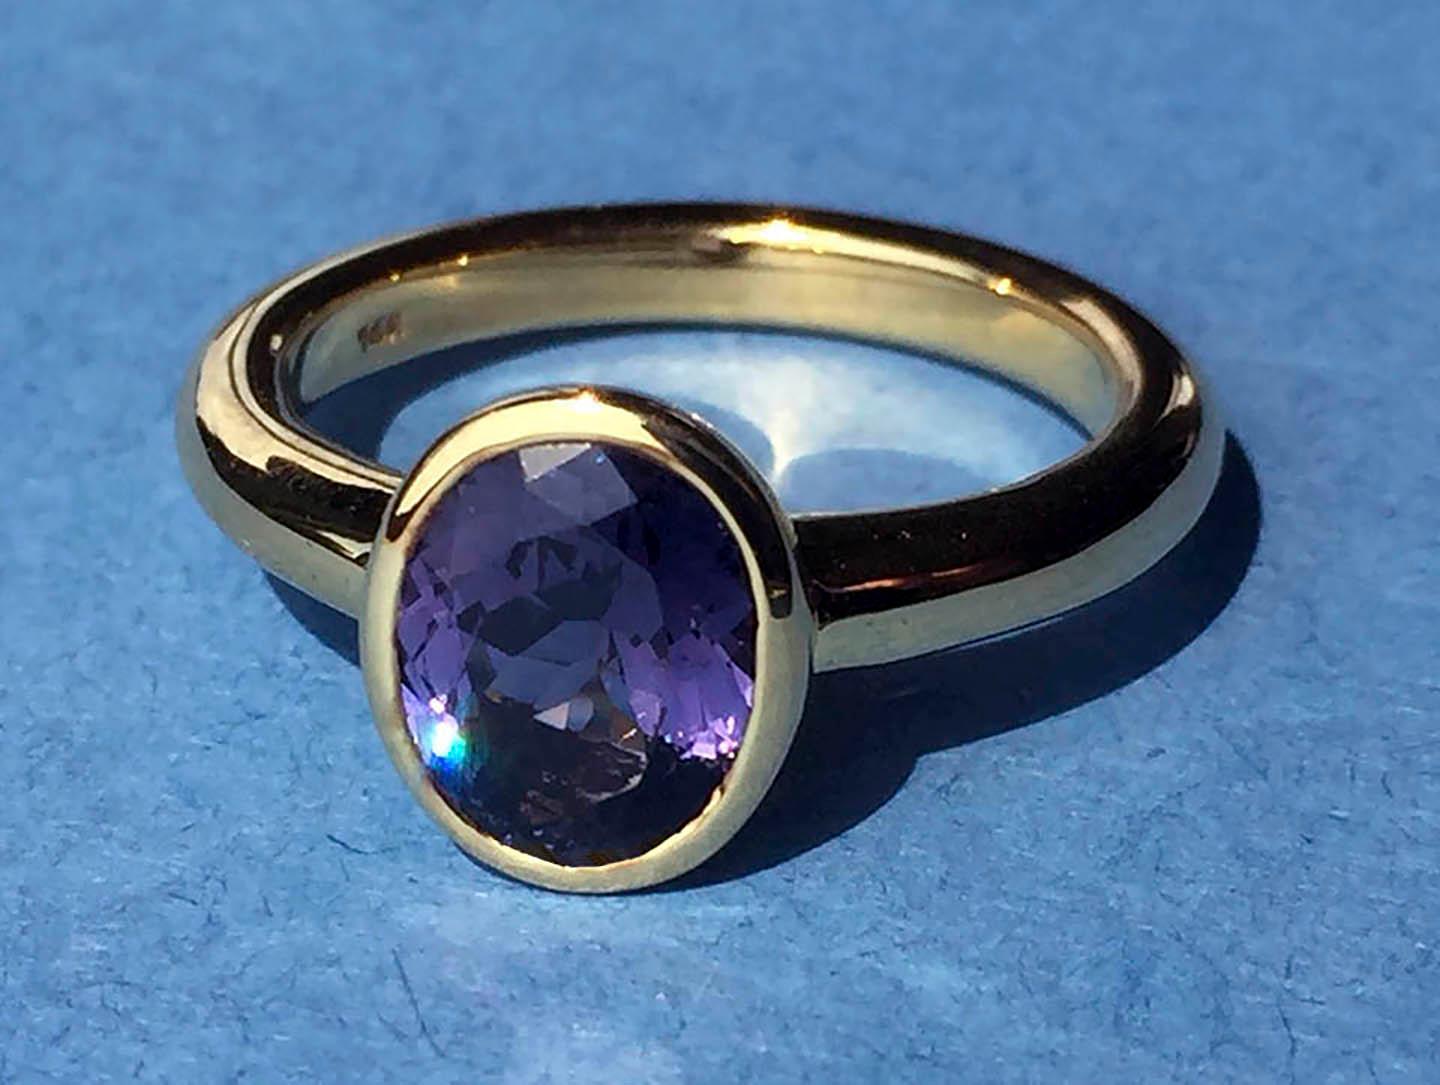 A 14kt Gold Ring with a 1.3 Carat Oval Purple Spinel. Gold weight is 5.2 Grams, Ring Size is 6 USA

Originally from San Diego, California, Kary Adam lived in the “Gem Capital of the World” - Bangkok, Thailand, sourcing local gem stones and working